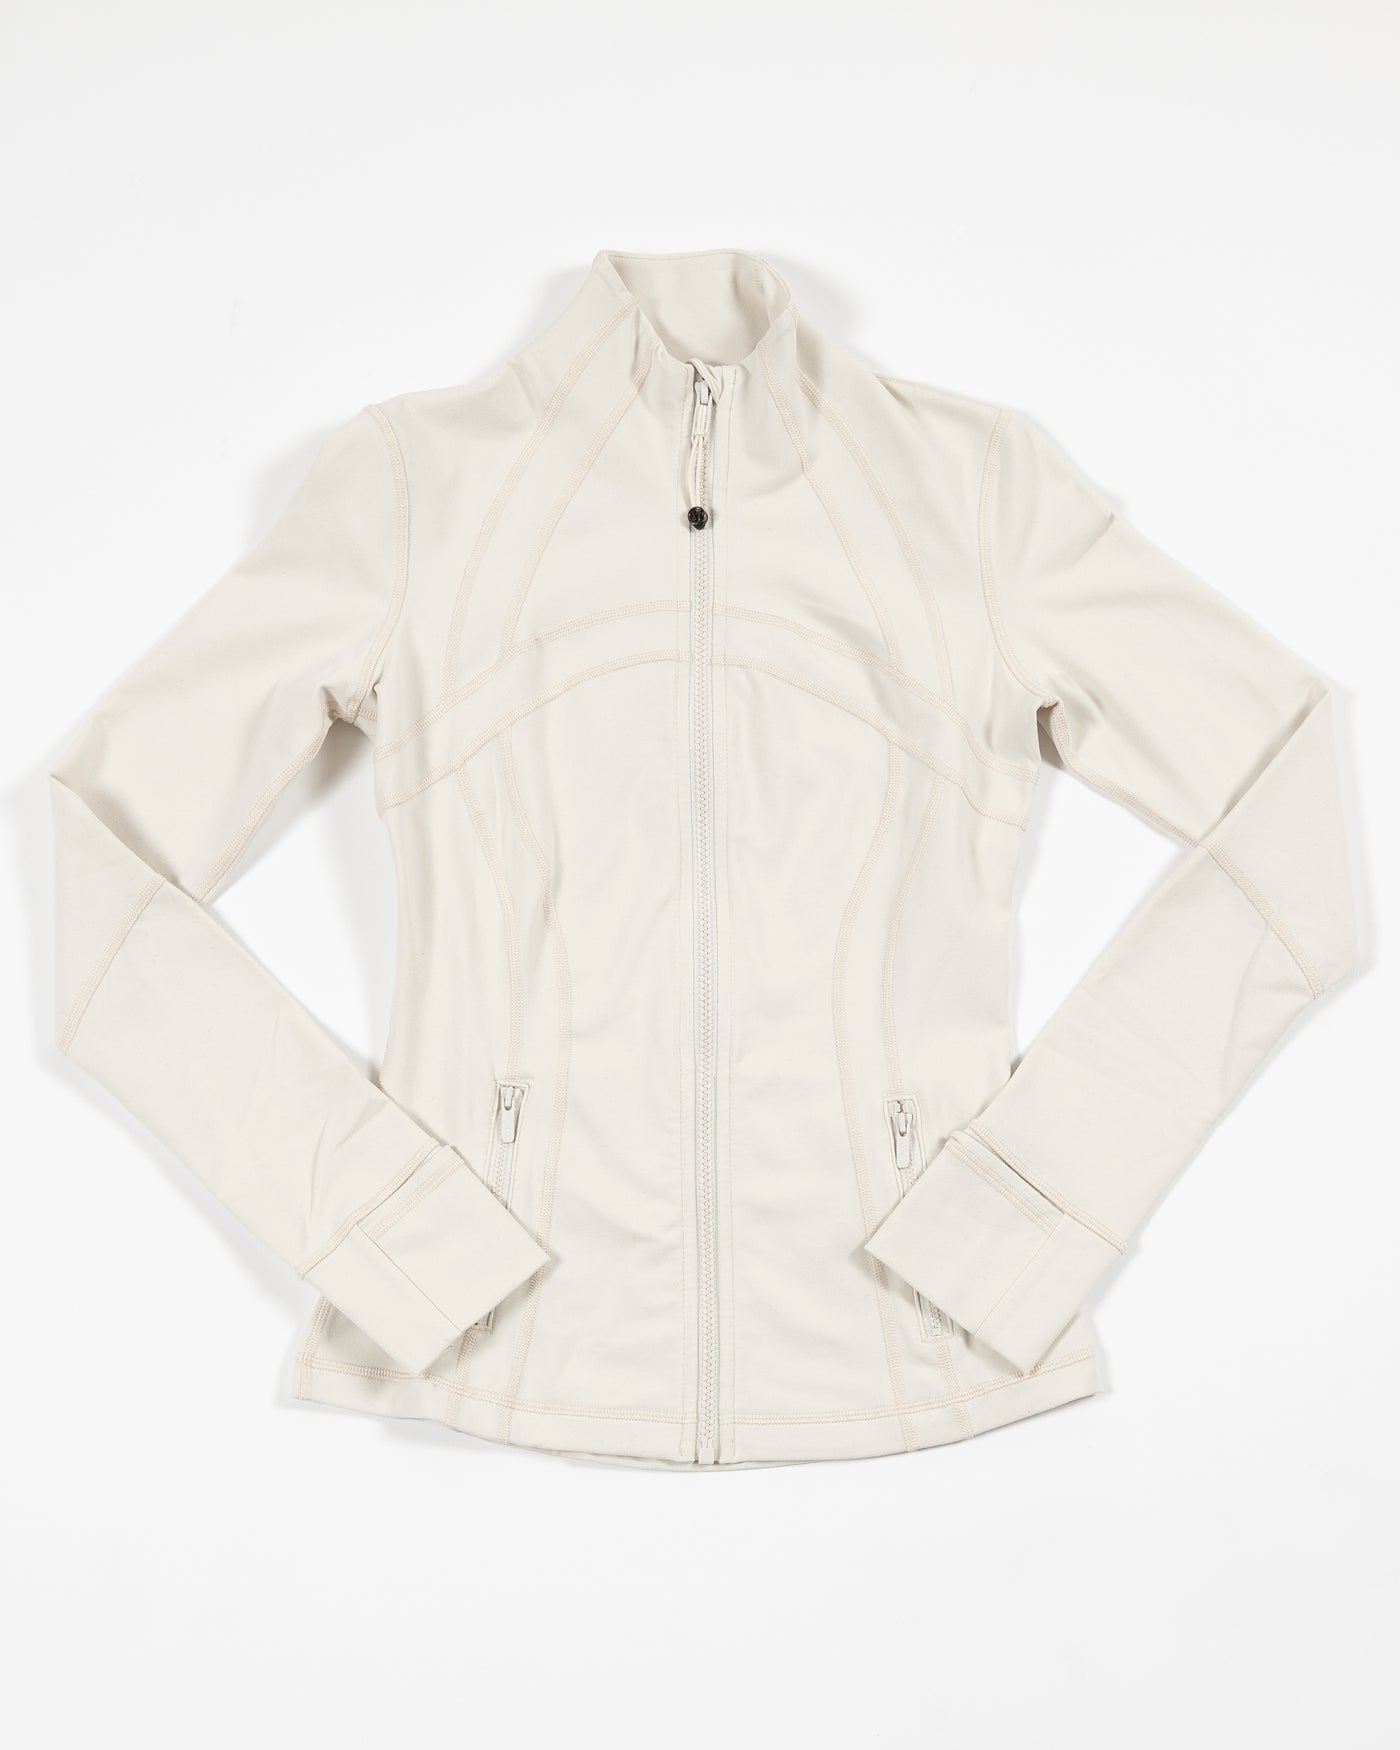 white define lululemon workout zip up jacket with primary logo - front lay flat